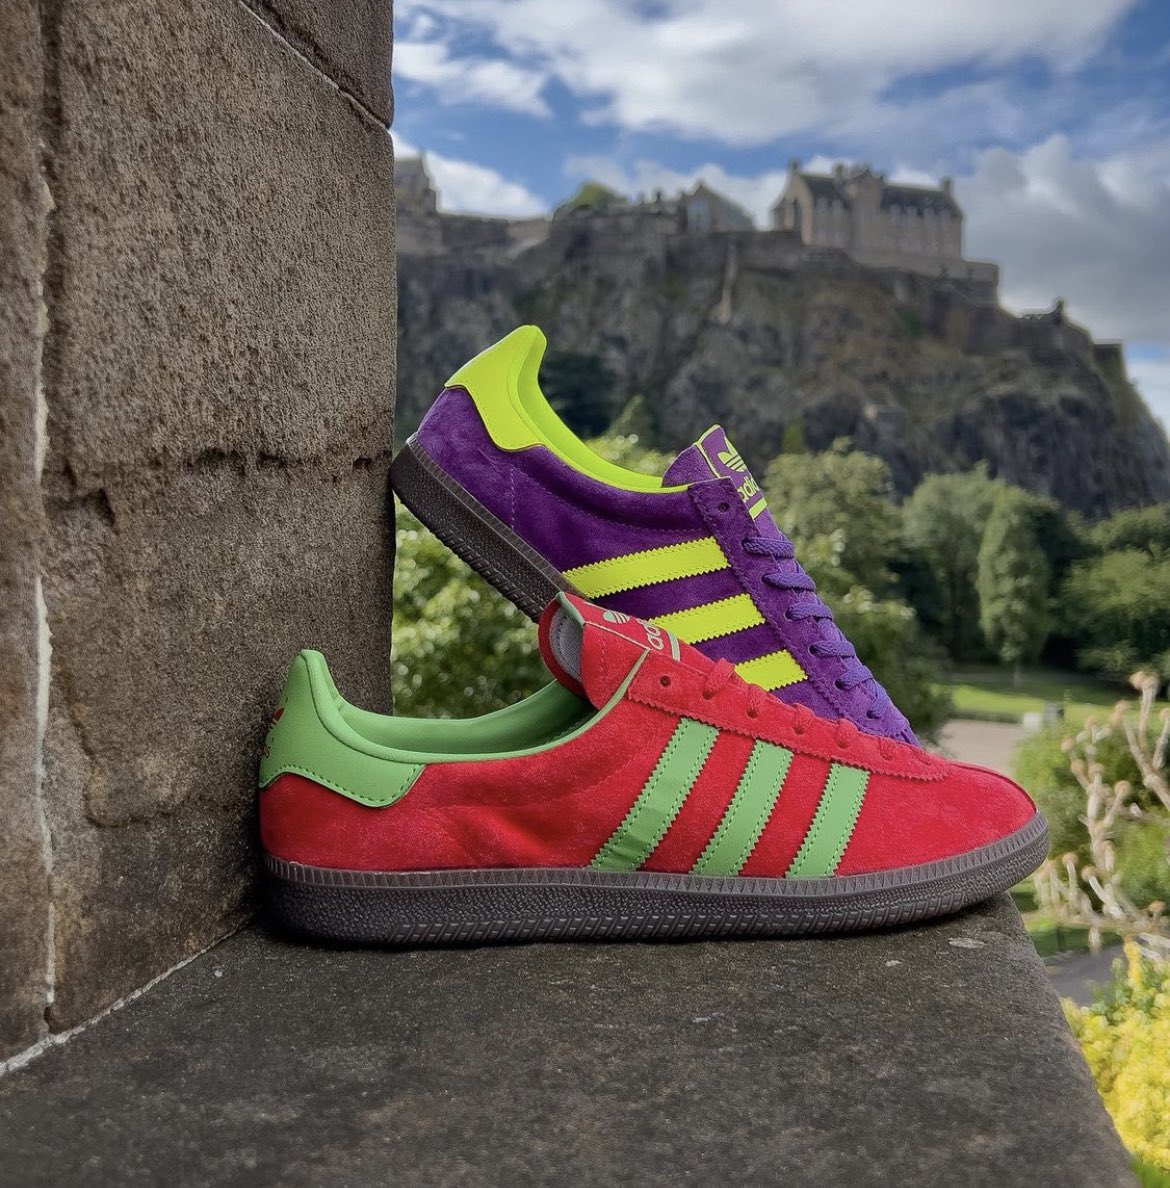 A veces inventar Estado The Casuals Directory on Twitter: "#Ad 🚨 The second pack of Adidas Athens  “made in Japan” are now online and available here https://t.co/1fte2wHpFw  https://t.co/Qdw7VN9VUt" / Twitter